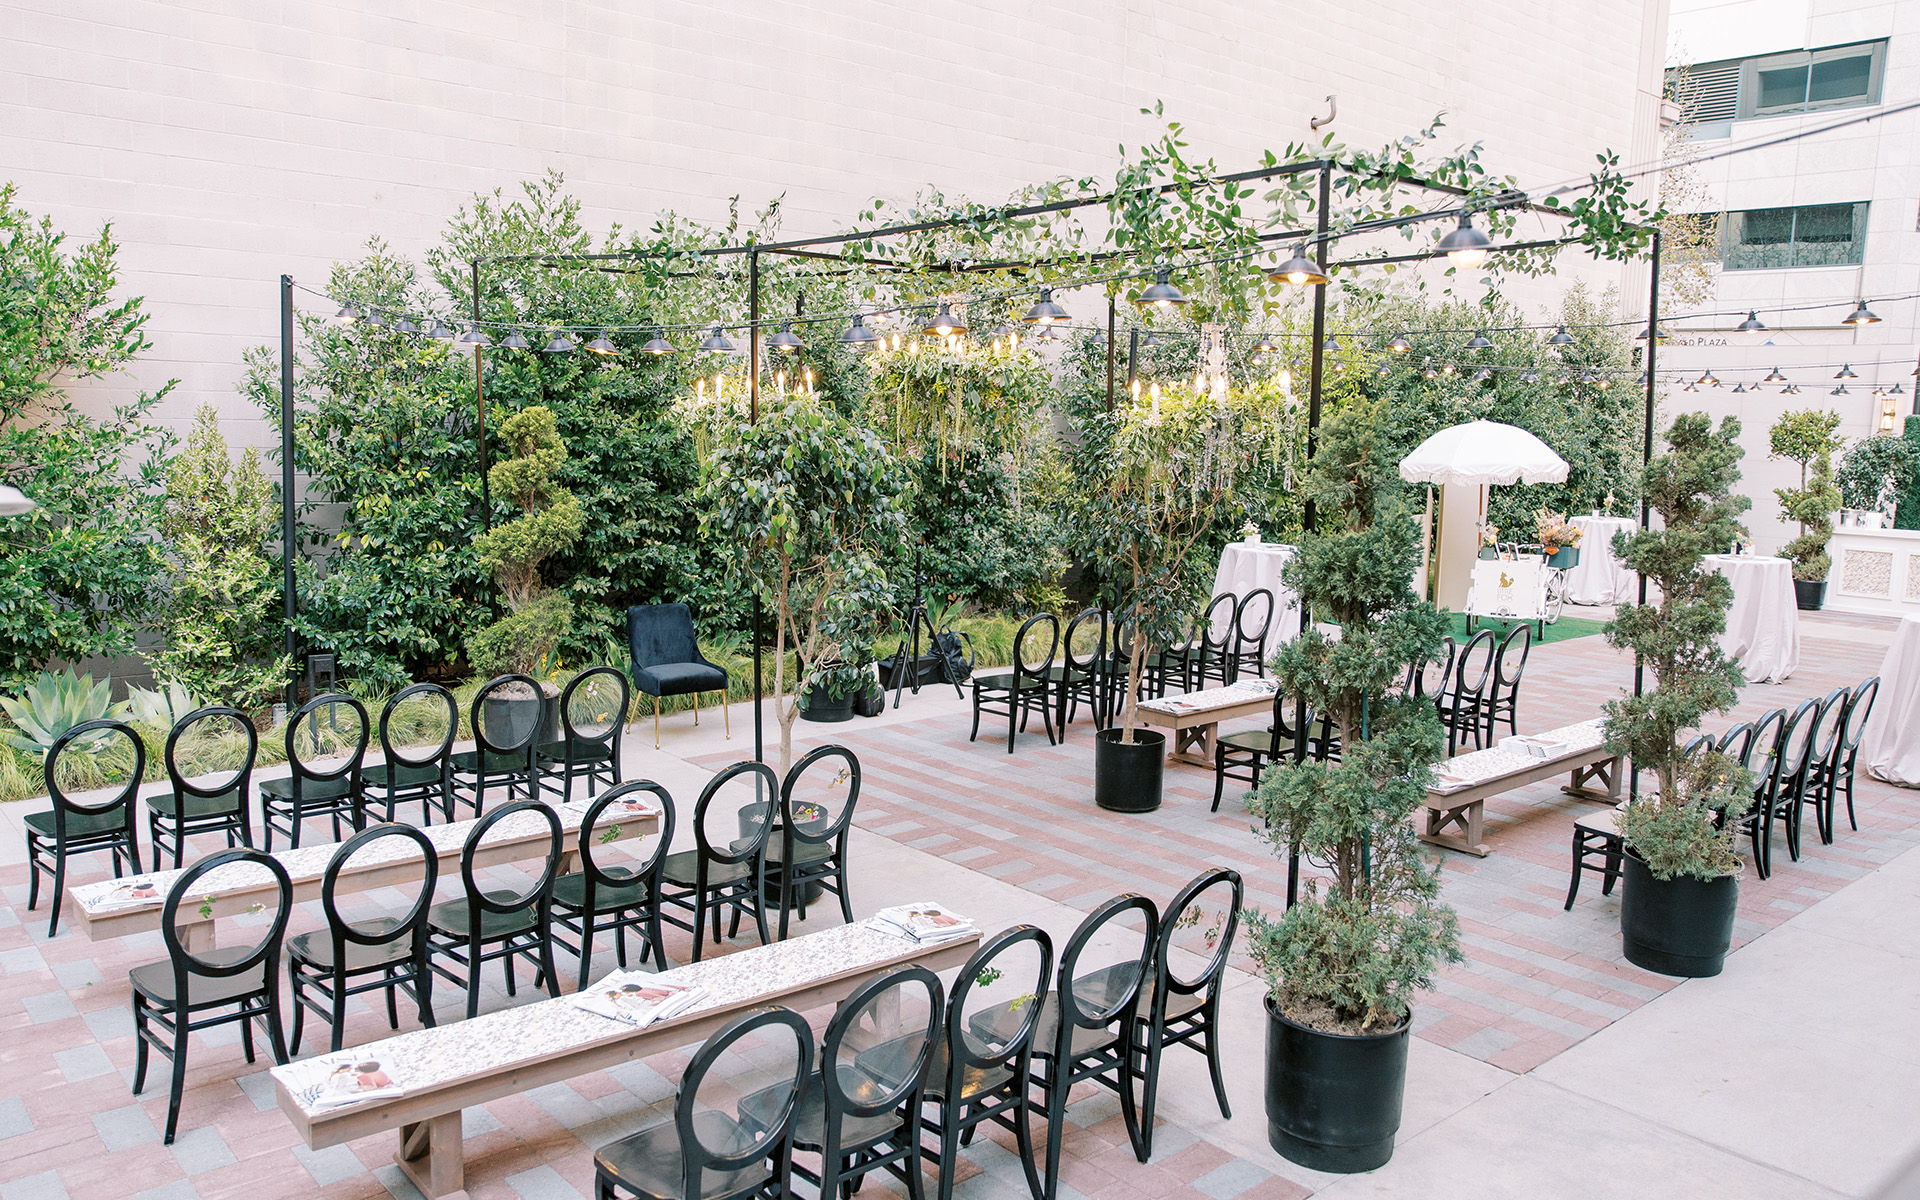 Outdoor Urban Event Space